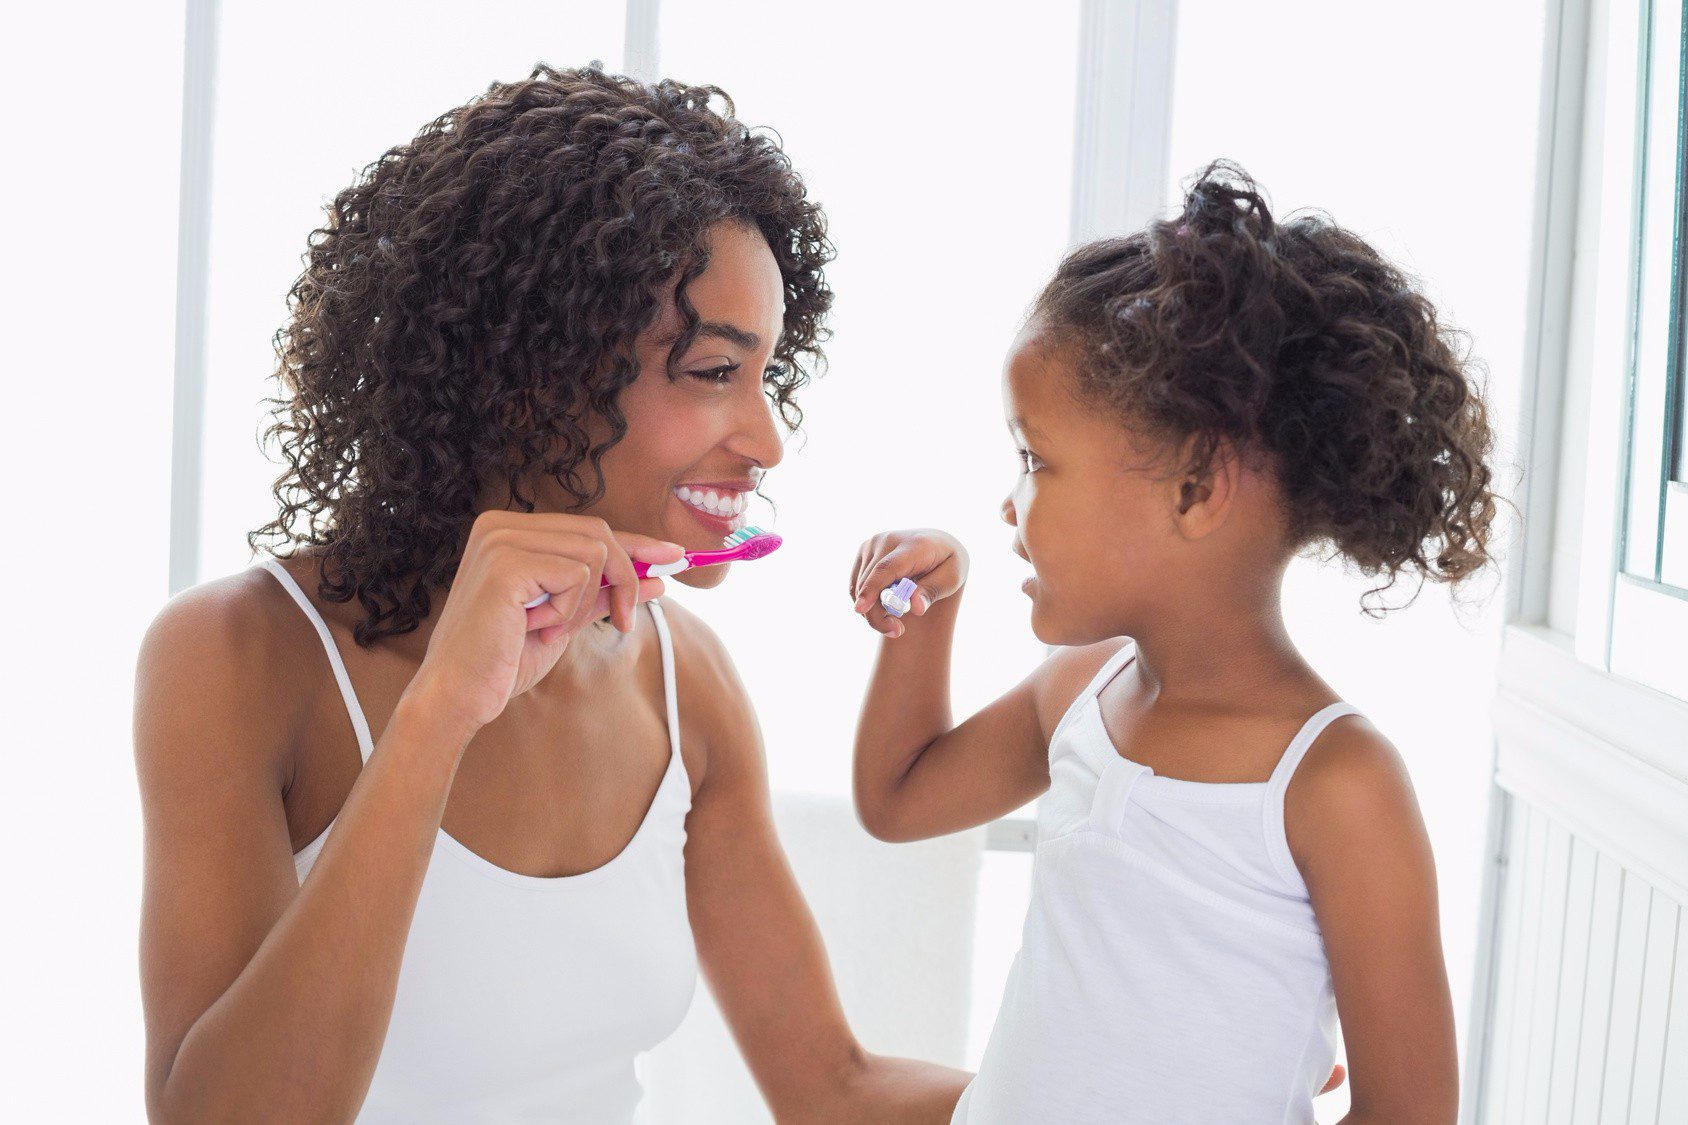 Mother teaching daughter how to brush teeth.